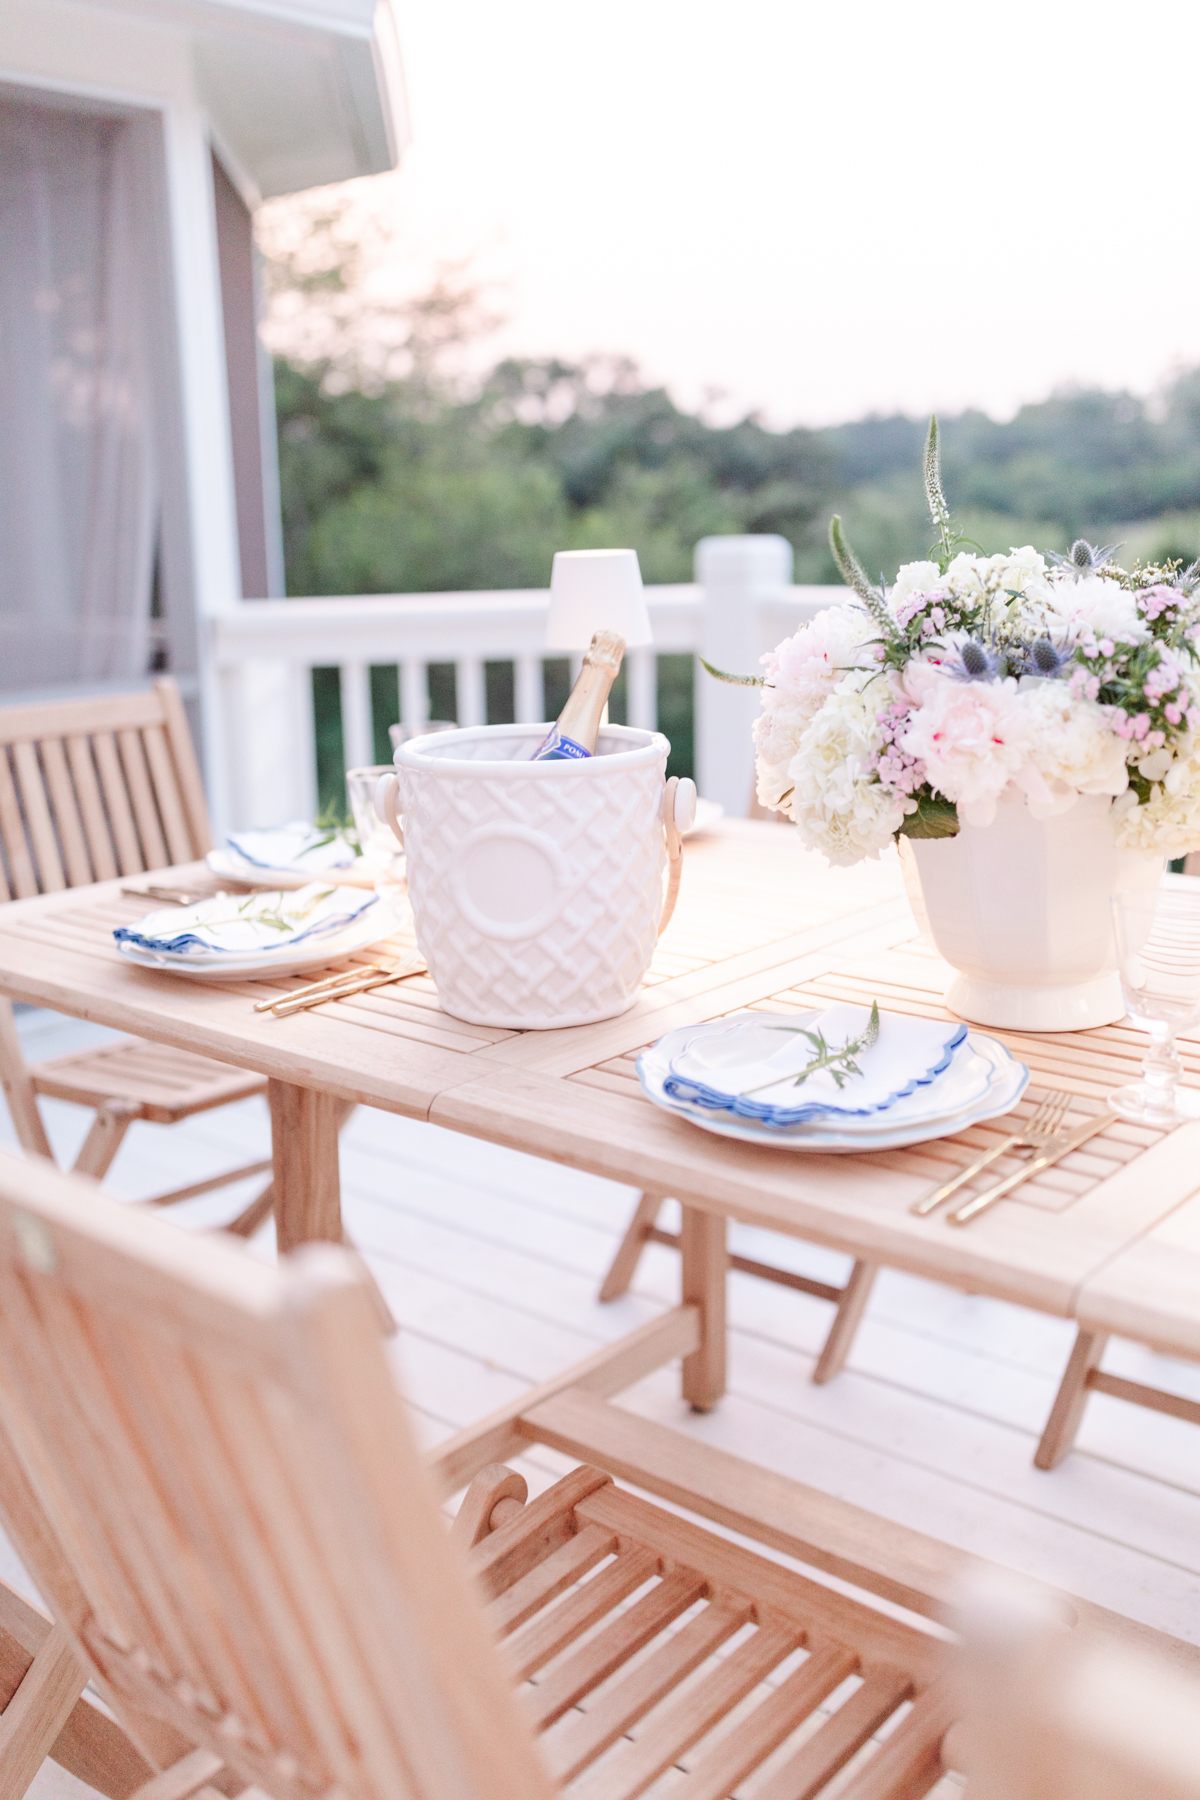 A patio furniture set featuring a wooden table and chairs, adorned with beautiful flowers.